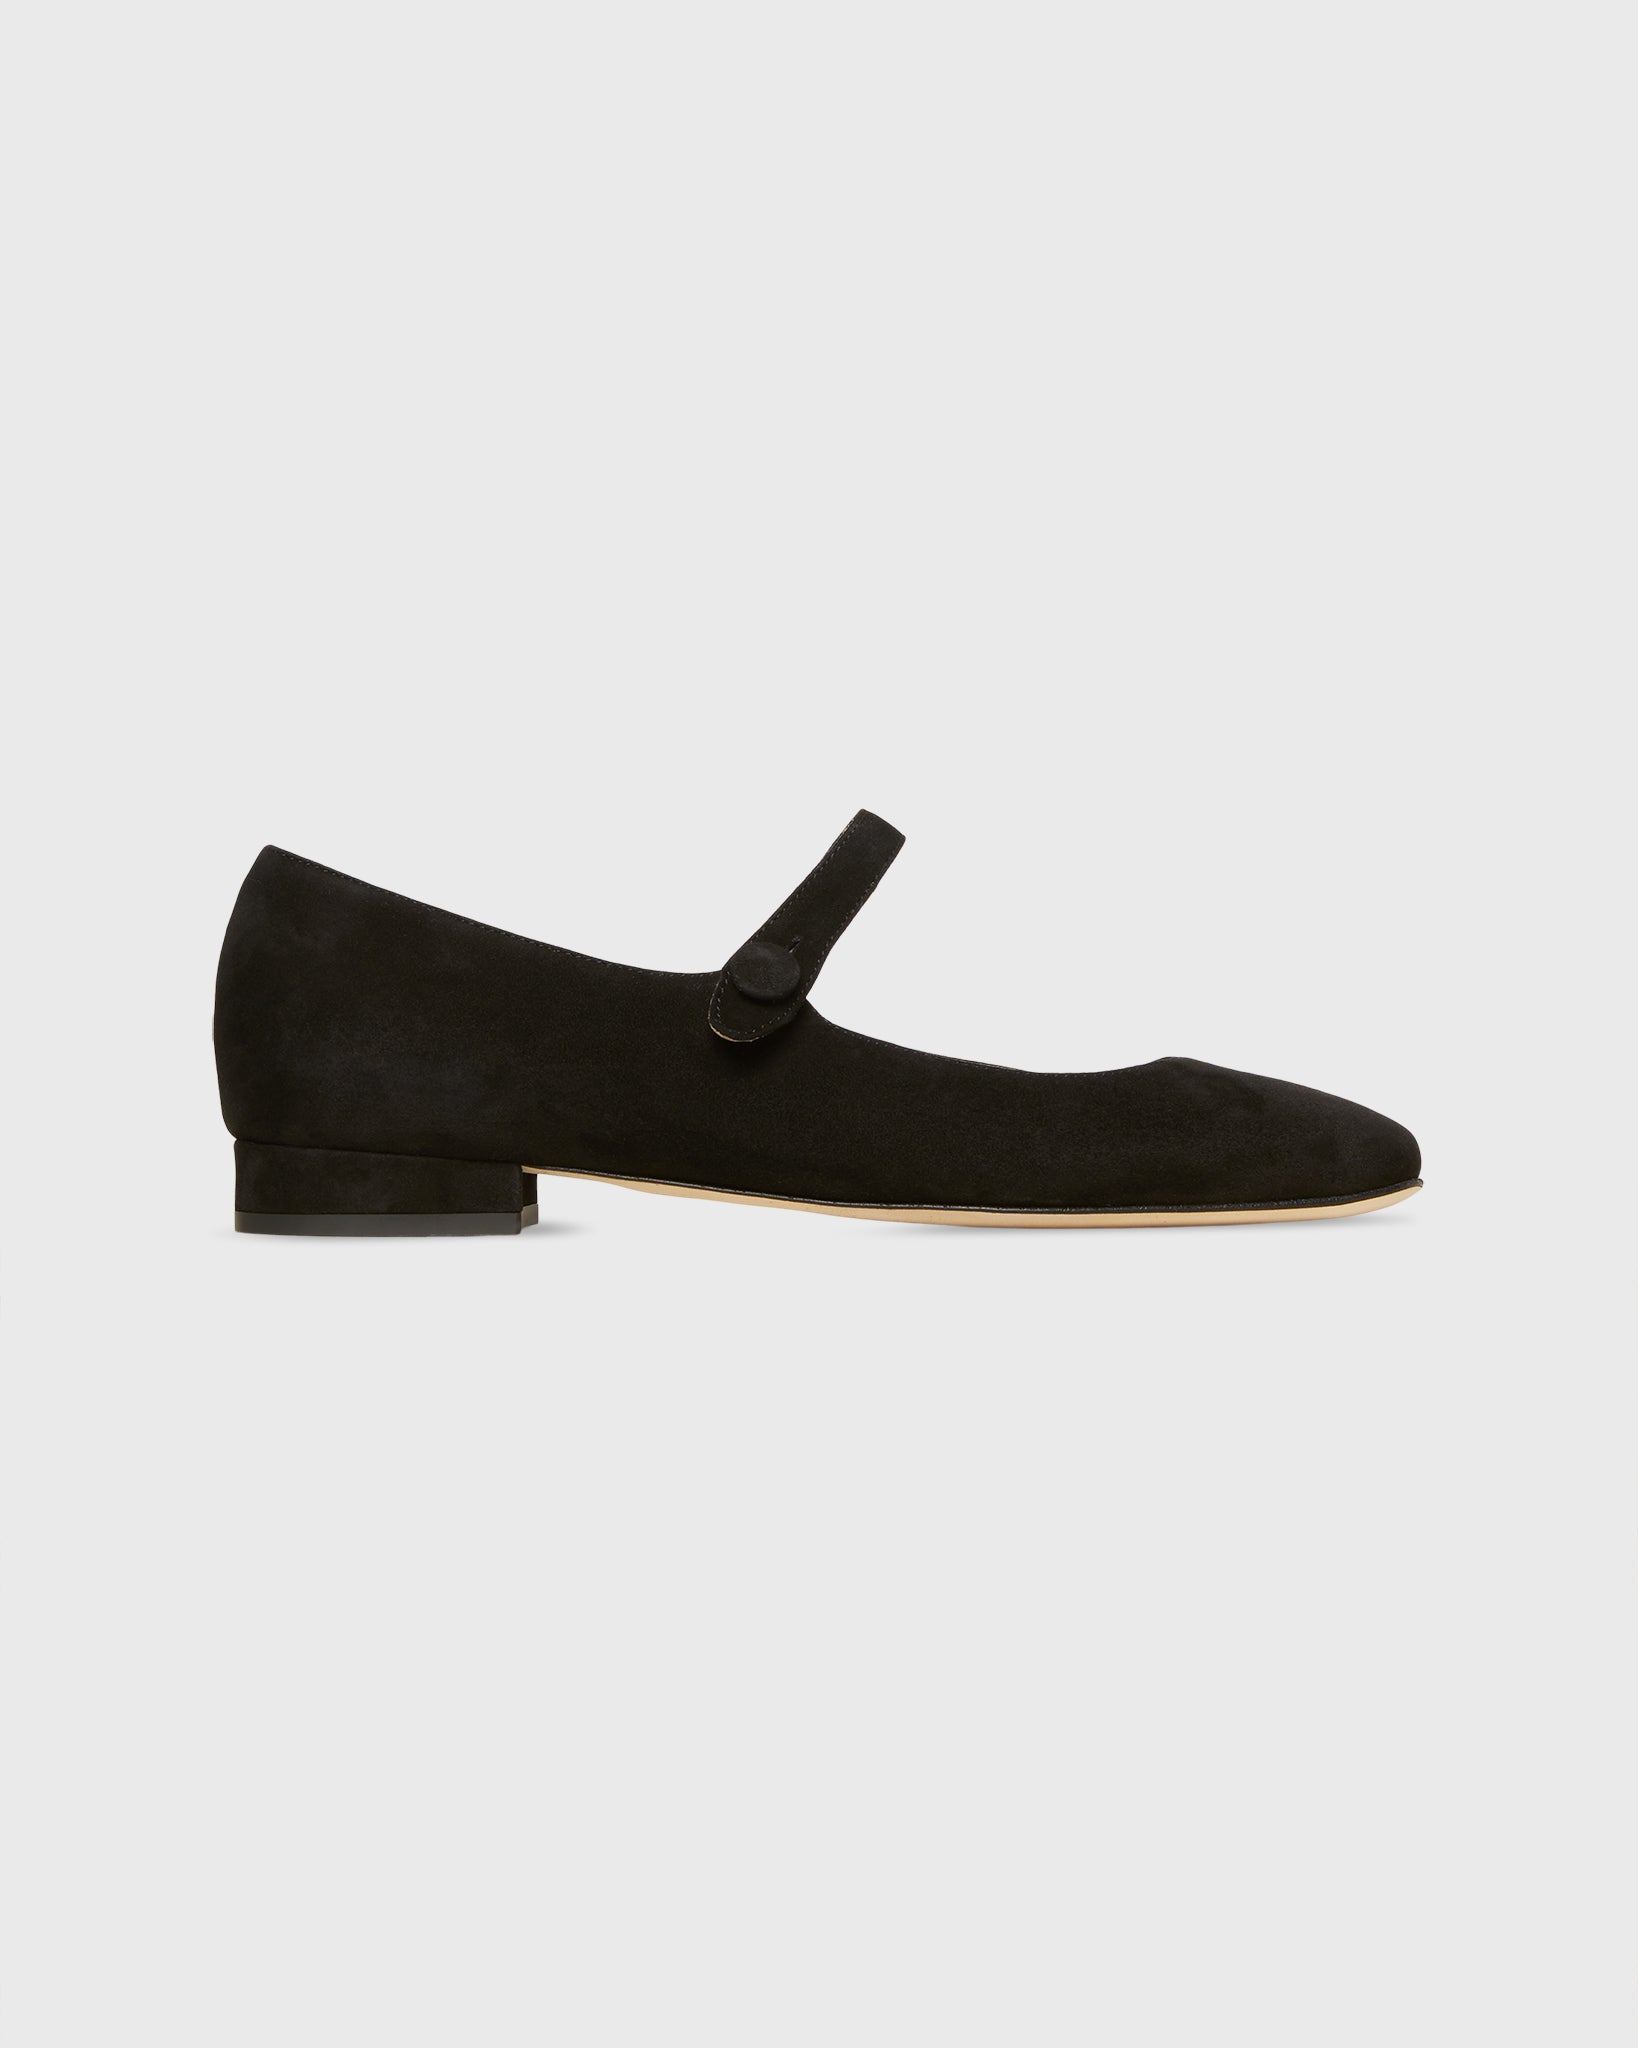 Square-Toe Mary Jane in Black Suede | Shop Ann Mashburn